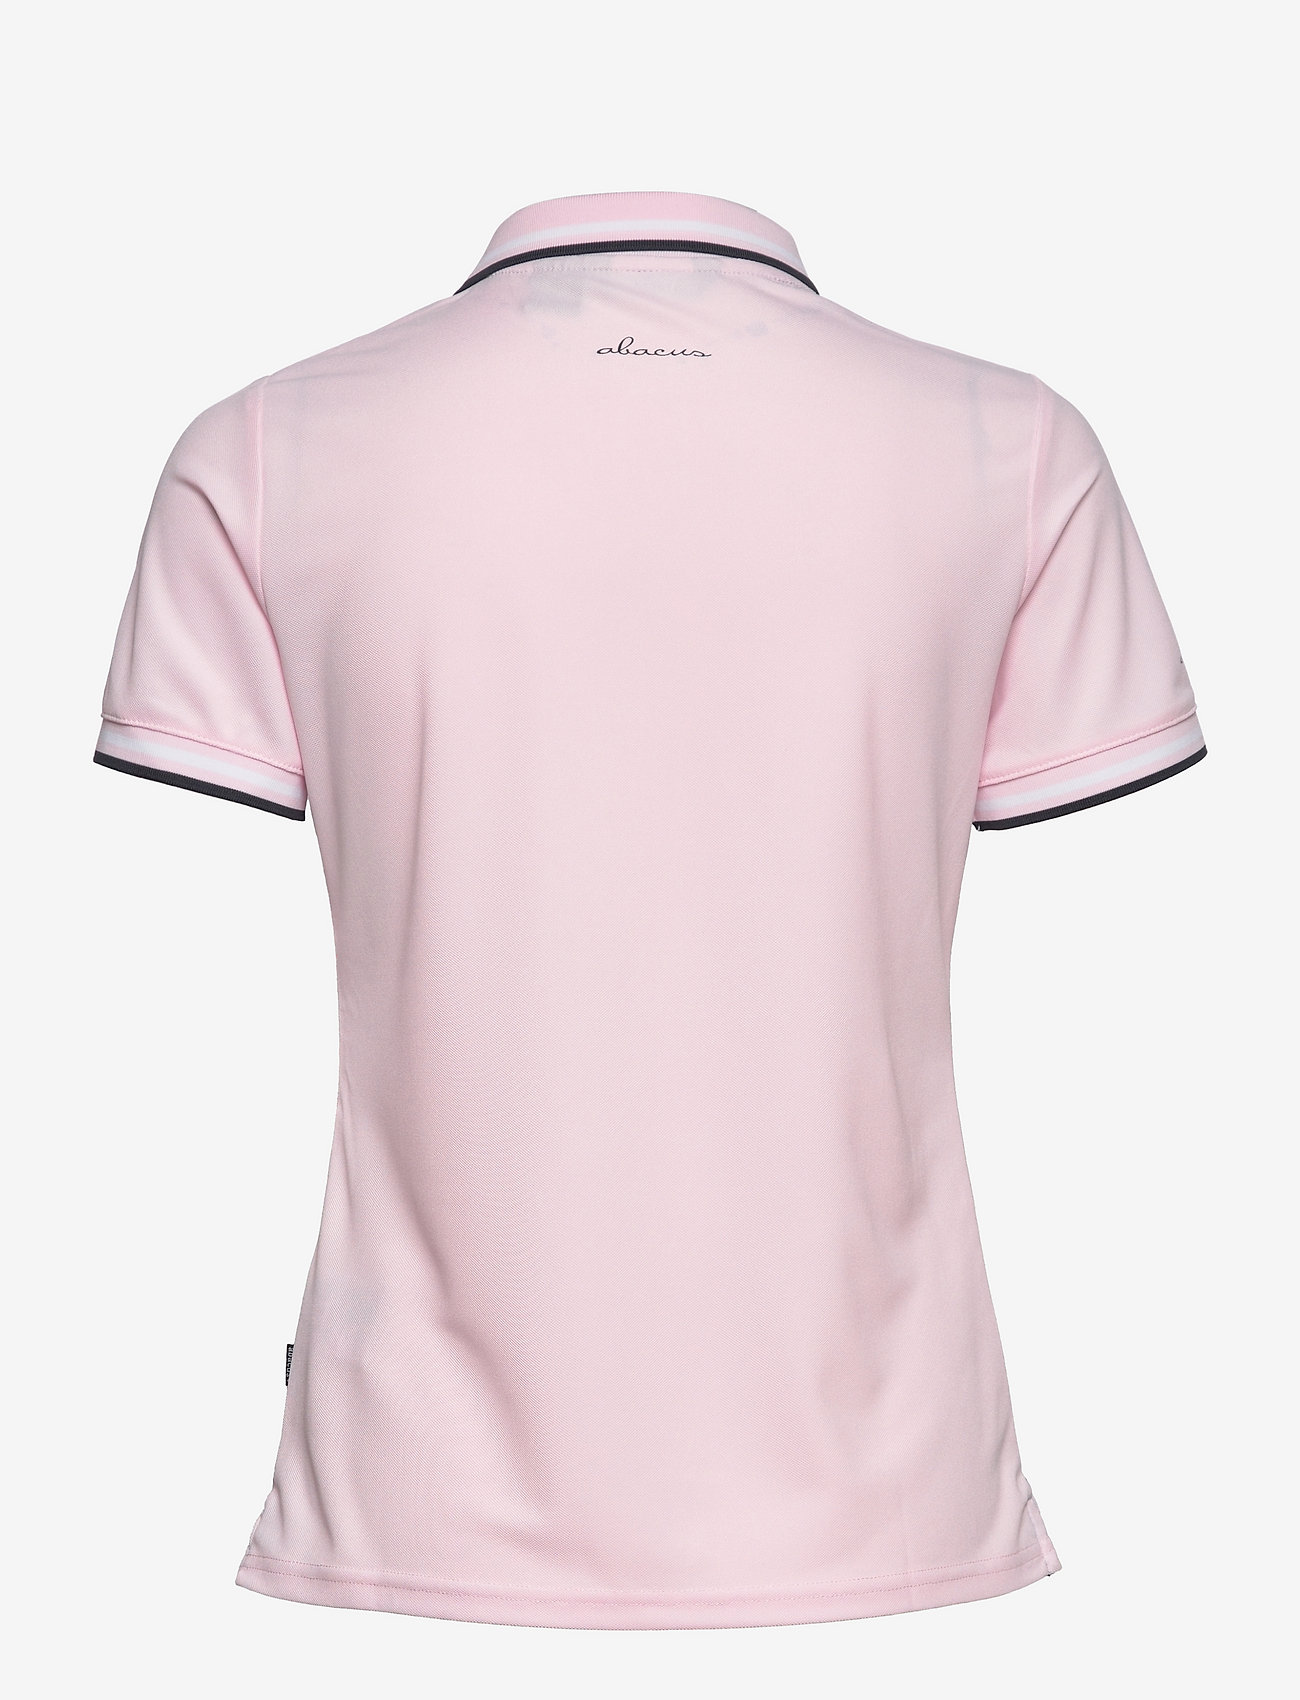 Abacus - Lds Pines polo - poloshirts - lt.pink - 1